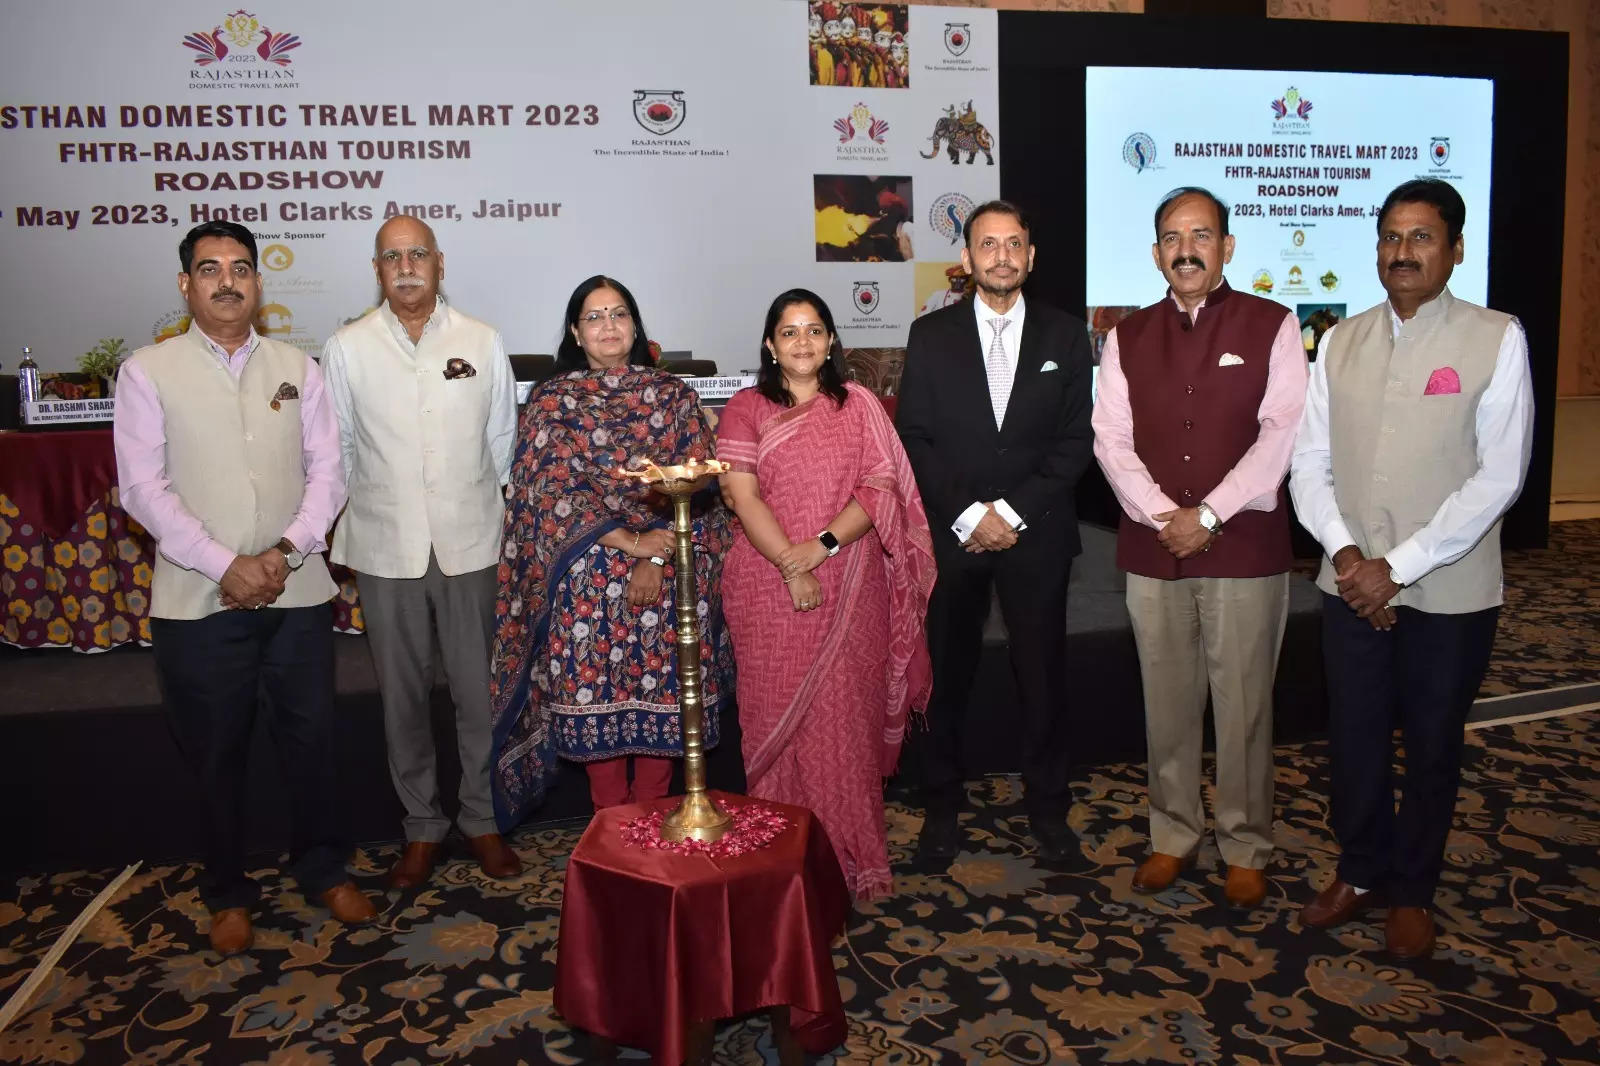 <p><em>The Rajasthan Domestic Travel Mart (RDTM) has been established as a partnership between the Department of Tourism and the Federation of Hospitality and Tourism in Rajasthan (FHTR) to boost the domestic tourism industry in the state.</em></p>